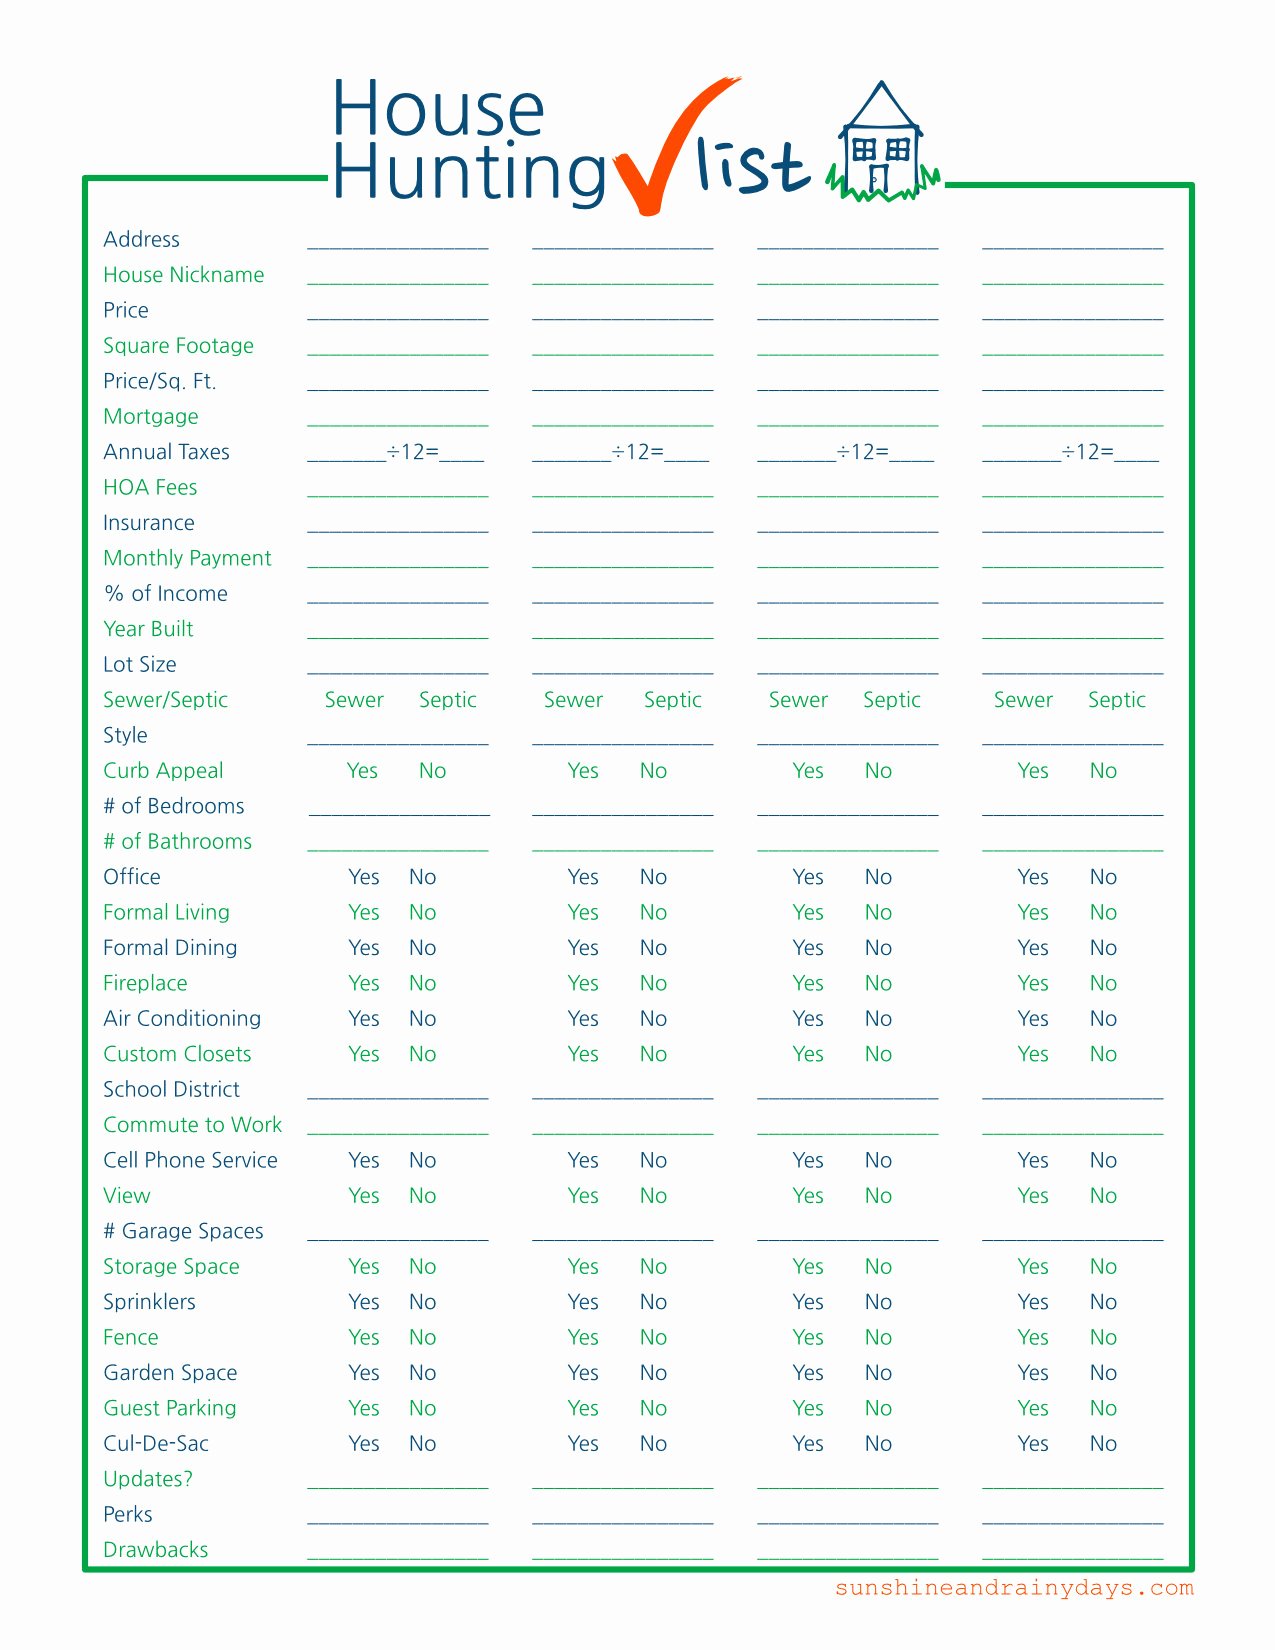 Home Building Checklist Template Lovely House Hunting Checklist Sunshine and Rainy Days